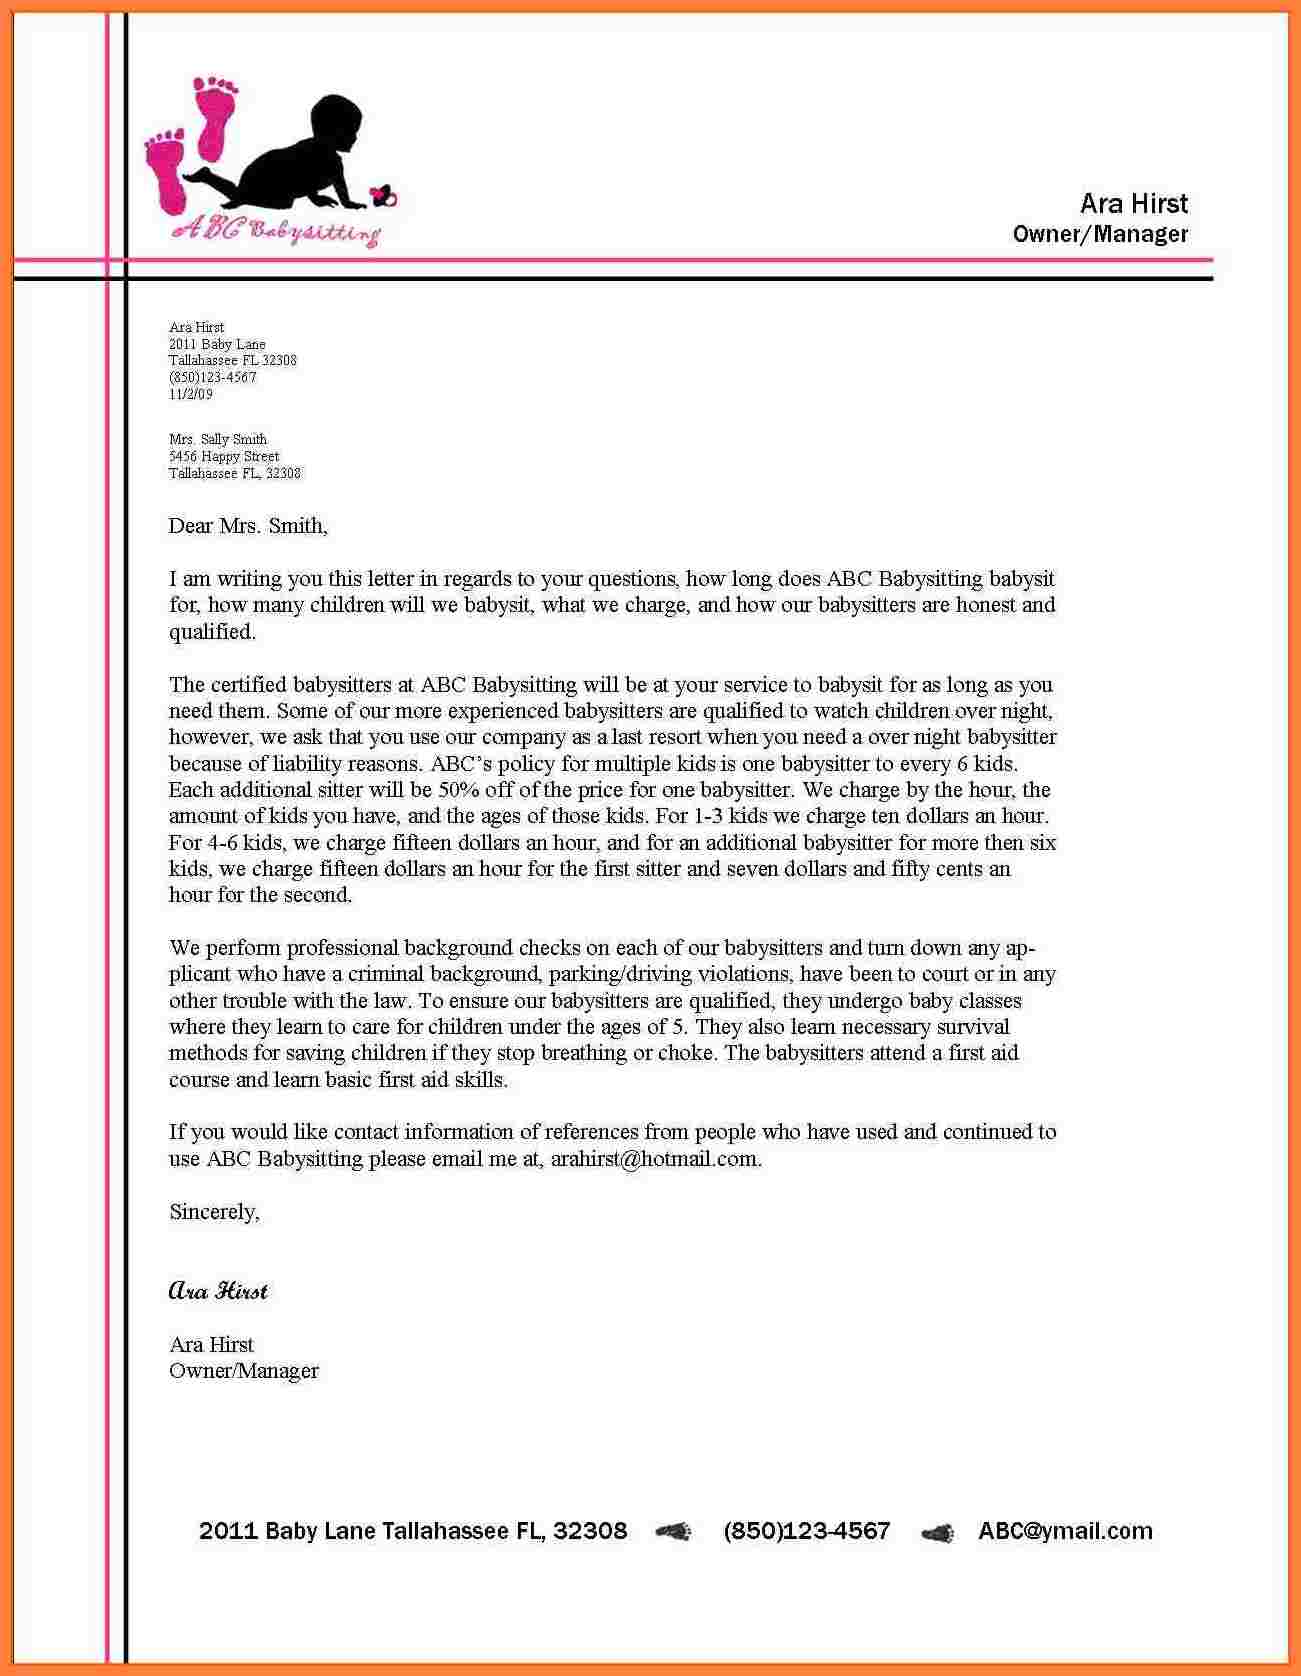 Example Of A Business Letter With Letterhead 1 – isipingo secondary